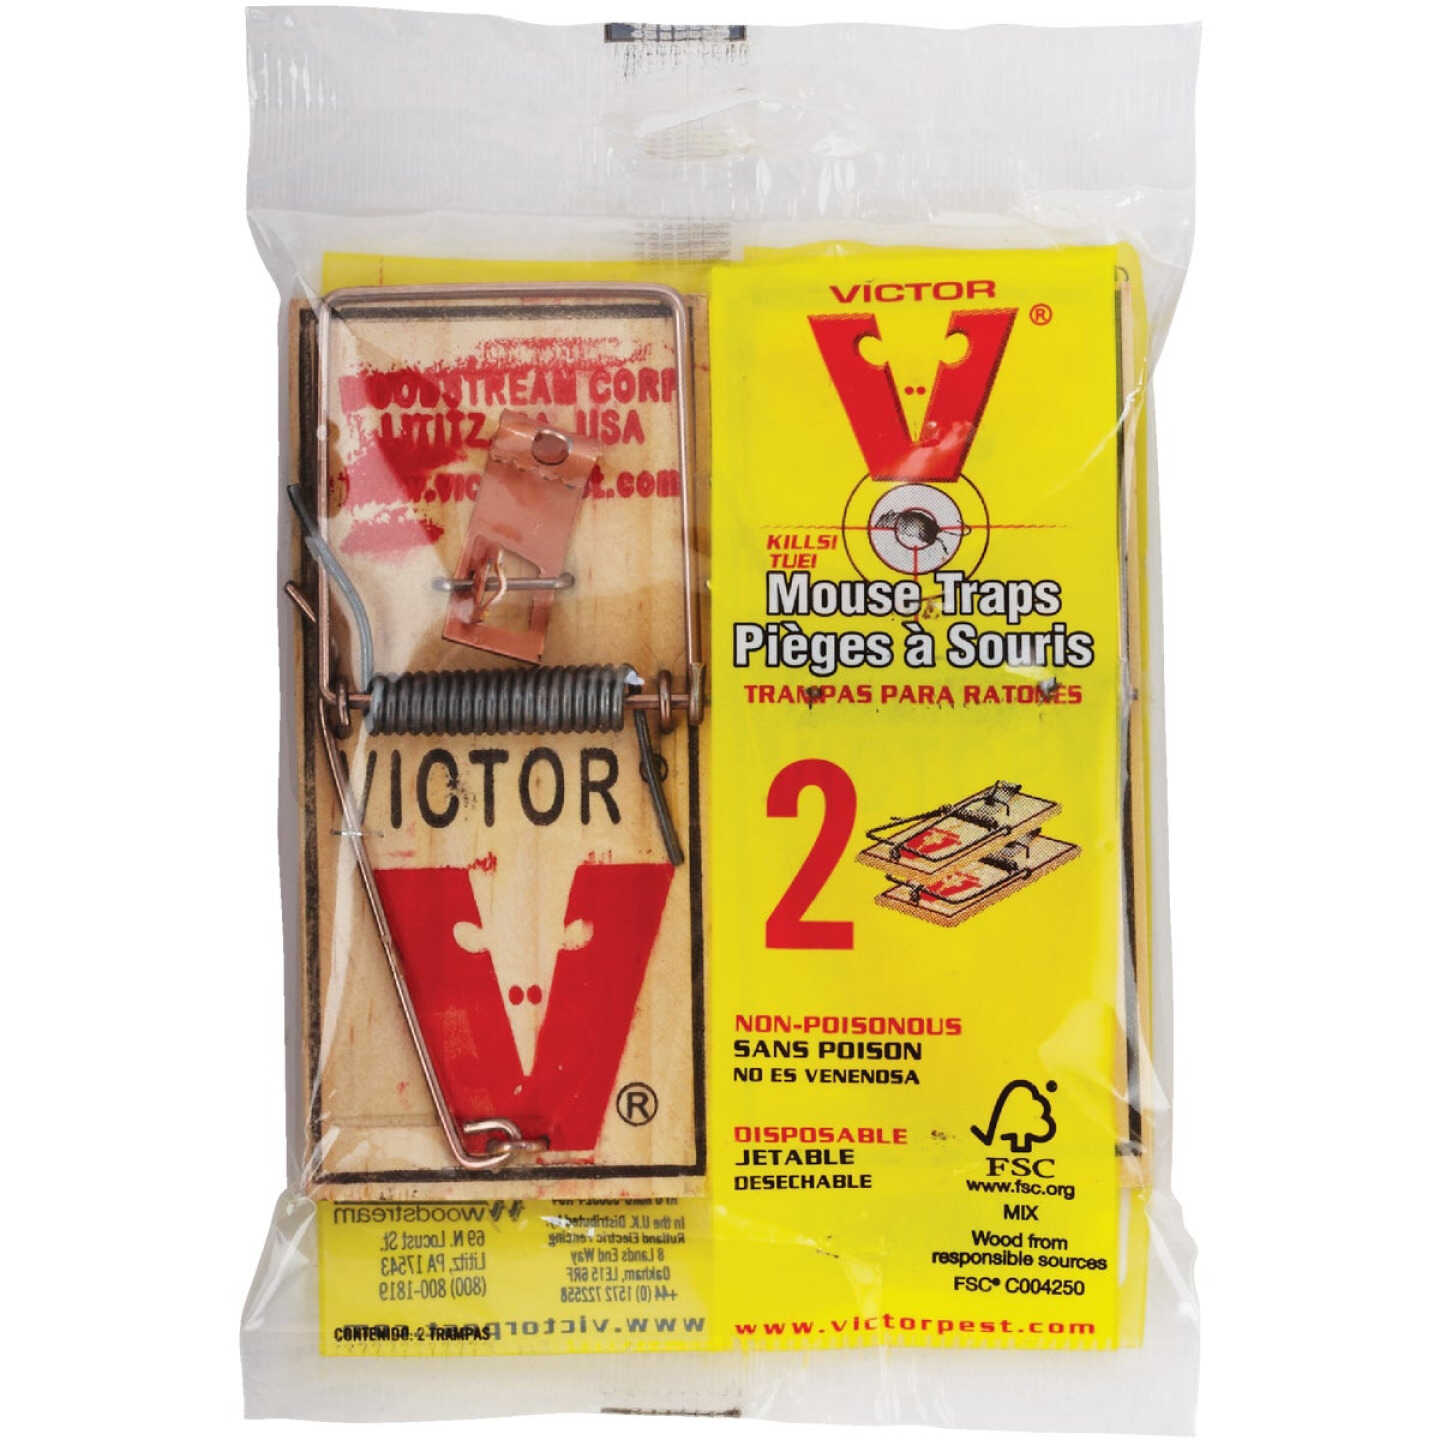 PROTECT HOME VICTOR MOUSE TRAP 3 PACK